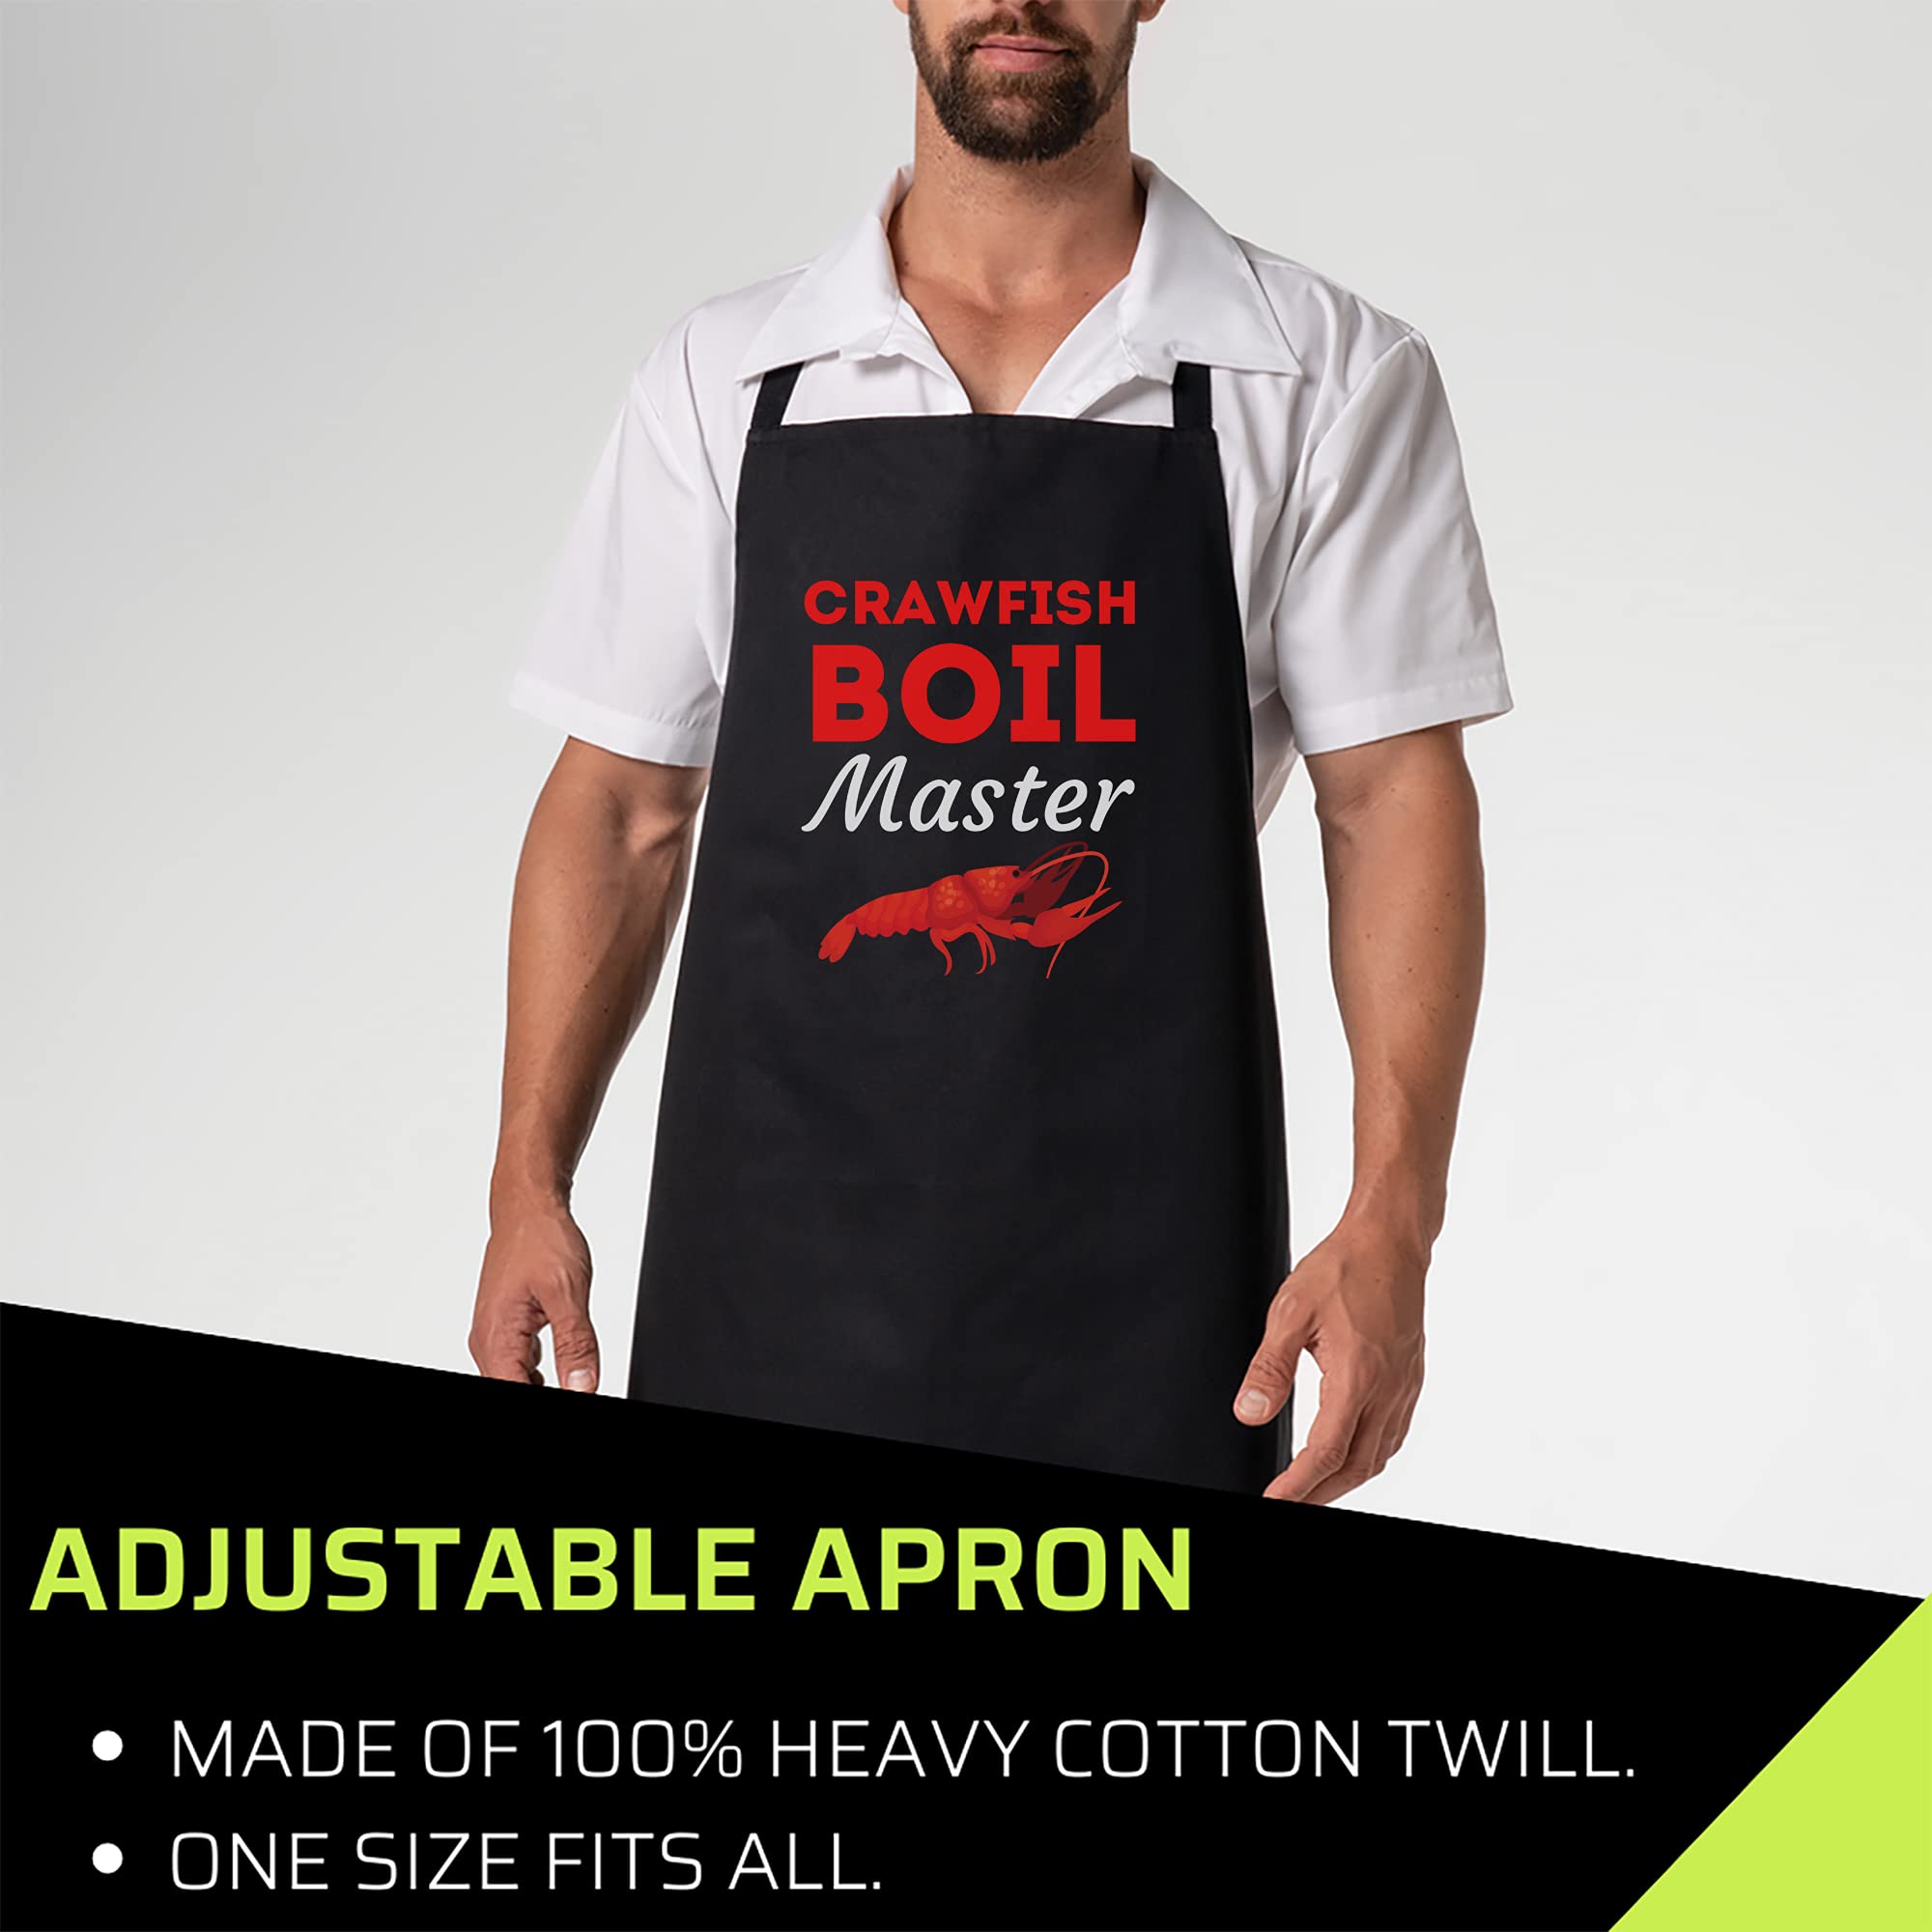 chef Cook Black Cooking Aprons- Crawfish Boil Master Cajun Seafood Festival Cooking T-Shirt Black Apron, One Size Fits All